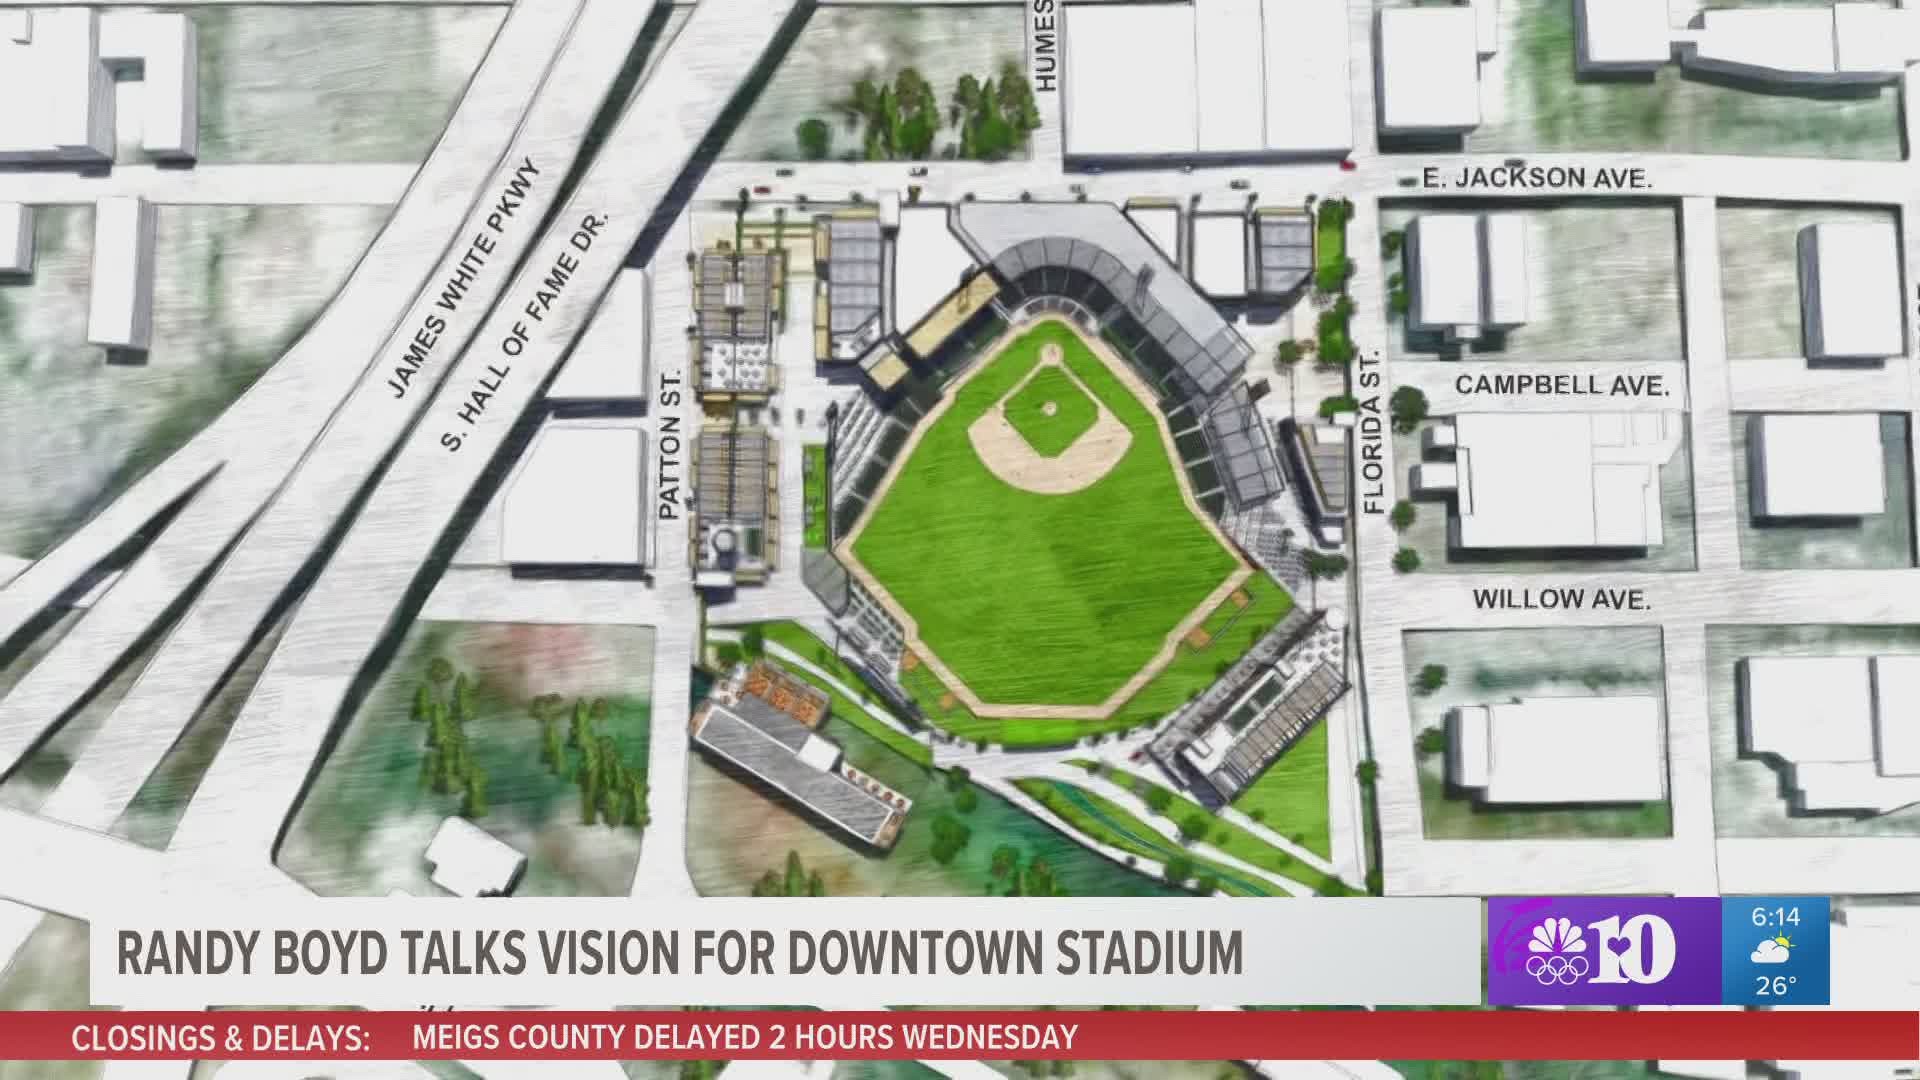 10News spoke with Randy Boyd for to see more of his vision for the downtown stadium.